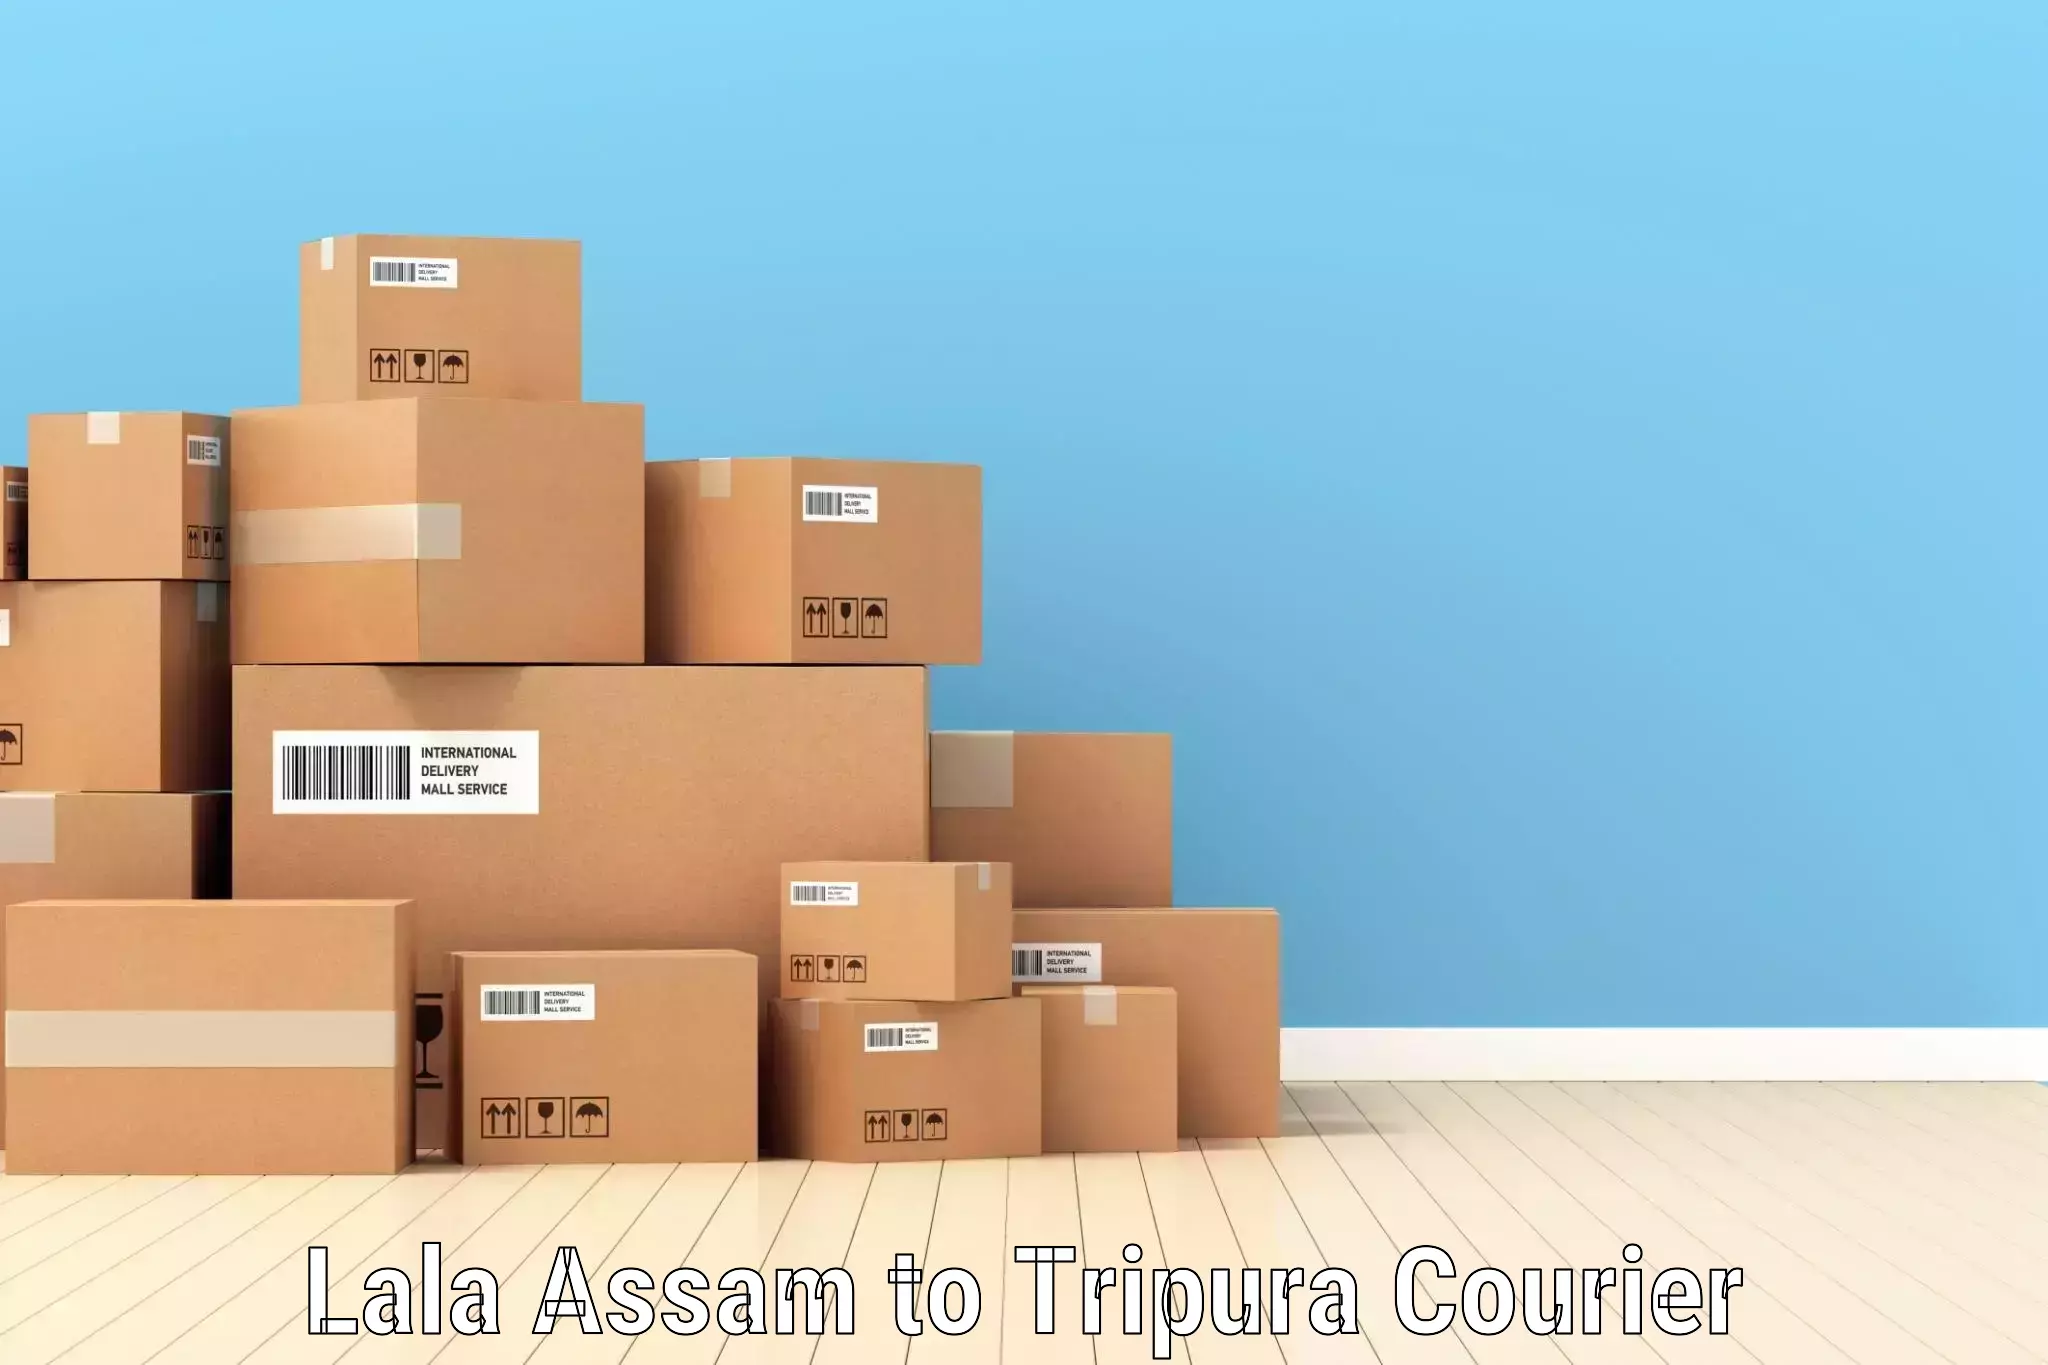 Large-scale shipping solutions Lala Assam to IIIT Agartala